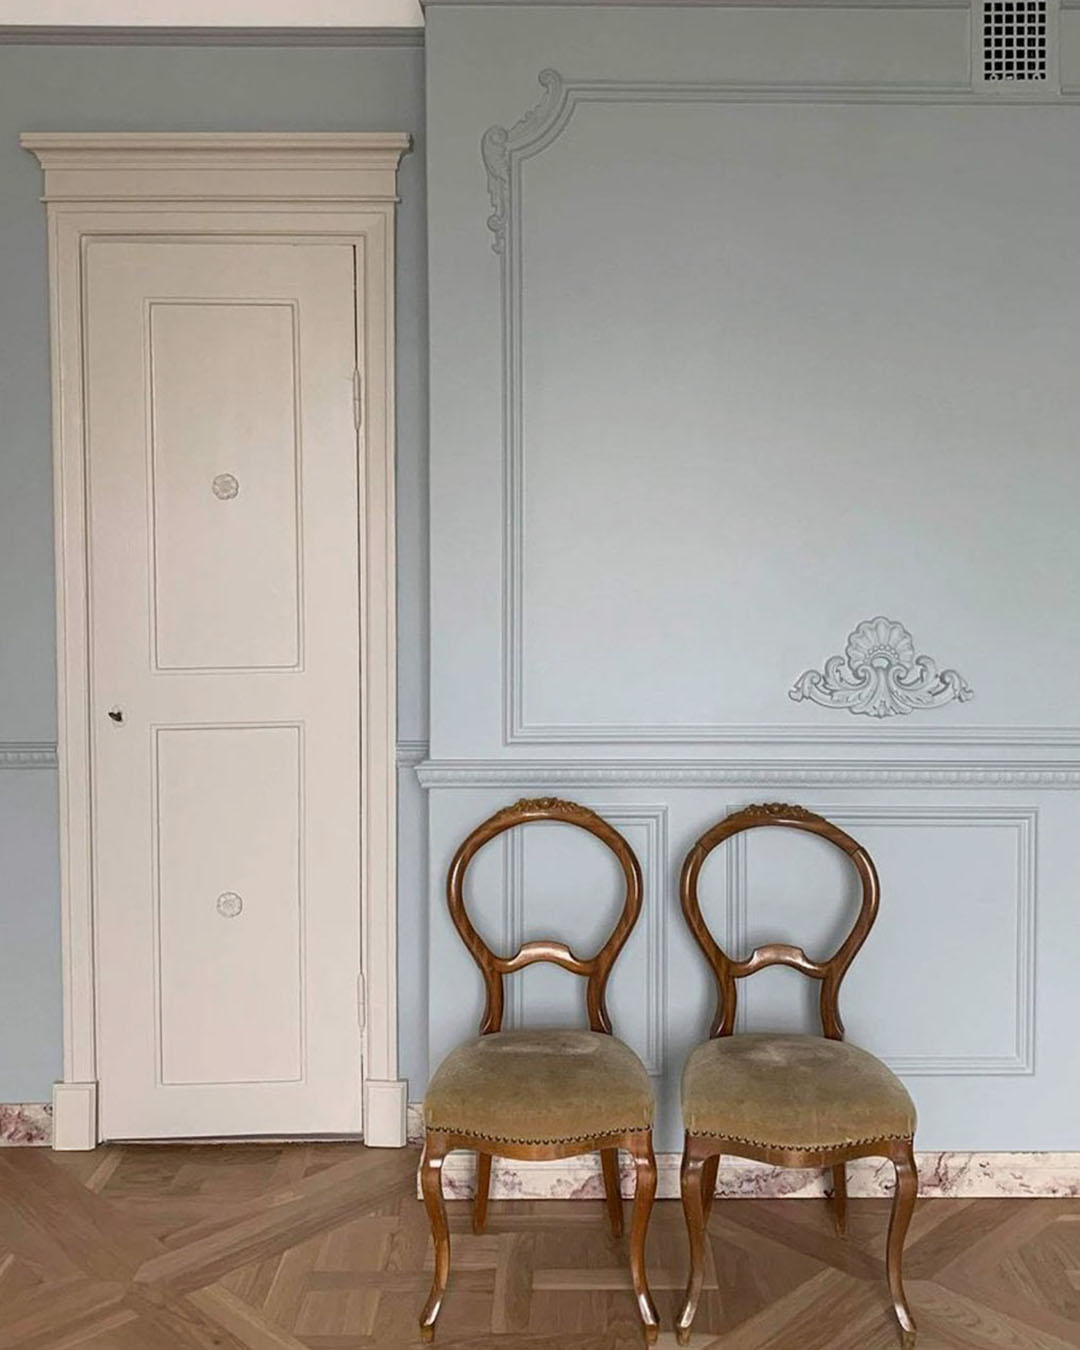 Antique chairs and blue wall